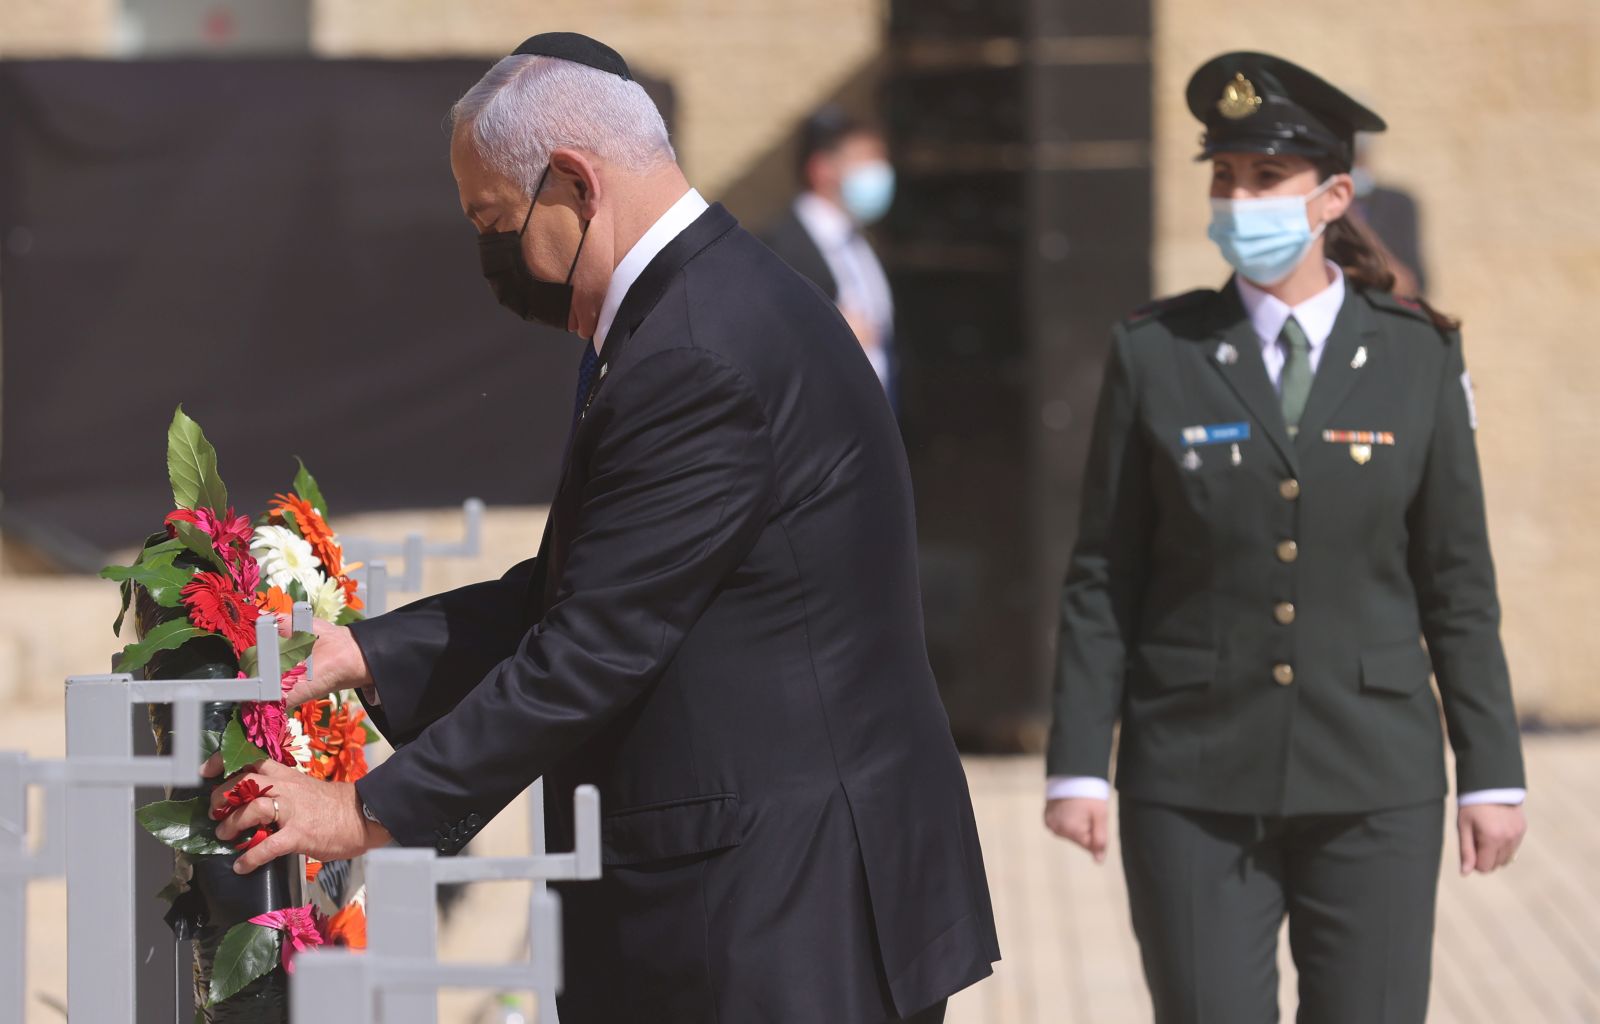 epa09121794 Israeli Prime Minister Benjamin Netanyahu attends a wreath-laying ceremony marking the Holocaust Remembrance Day at Warsaw Ghetto Square in Jerusalem's Yad Vashem memorial on 08 April 2021.  EPA/EMMANUEL DUNAND / POOL